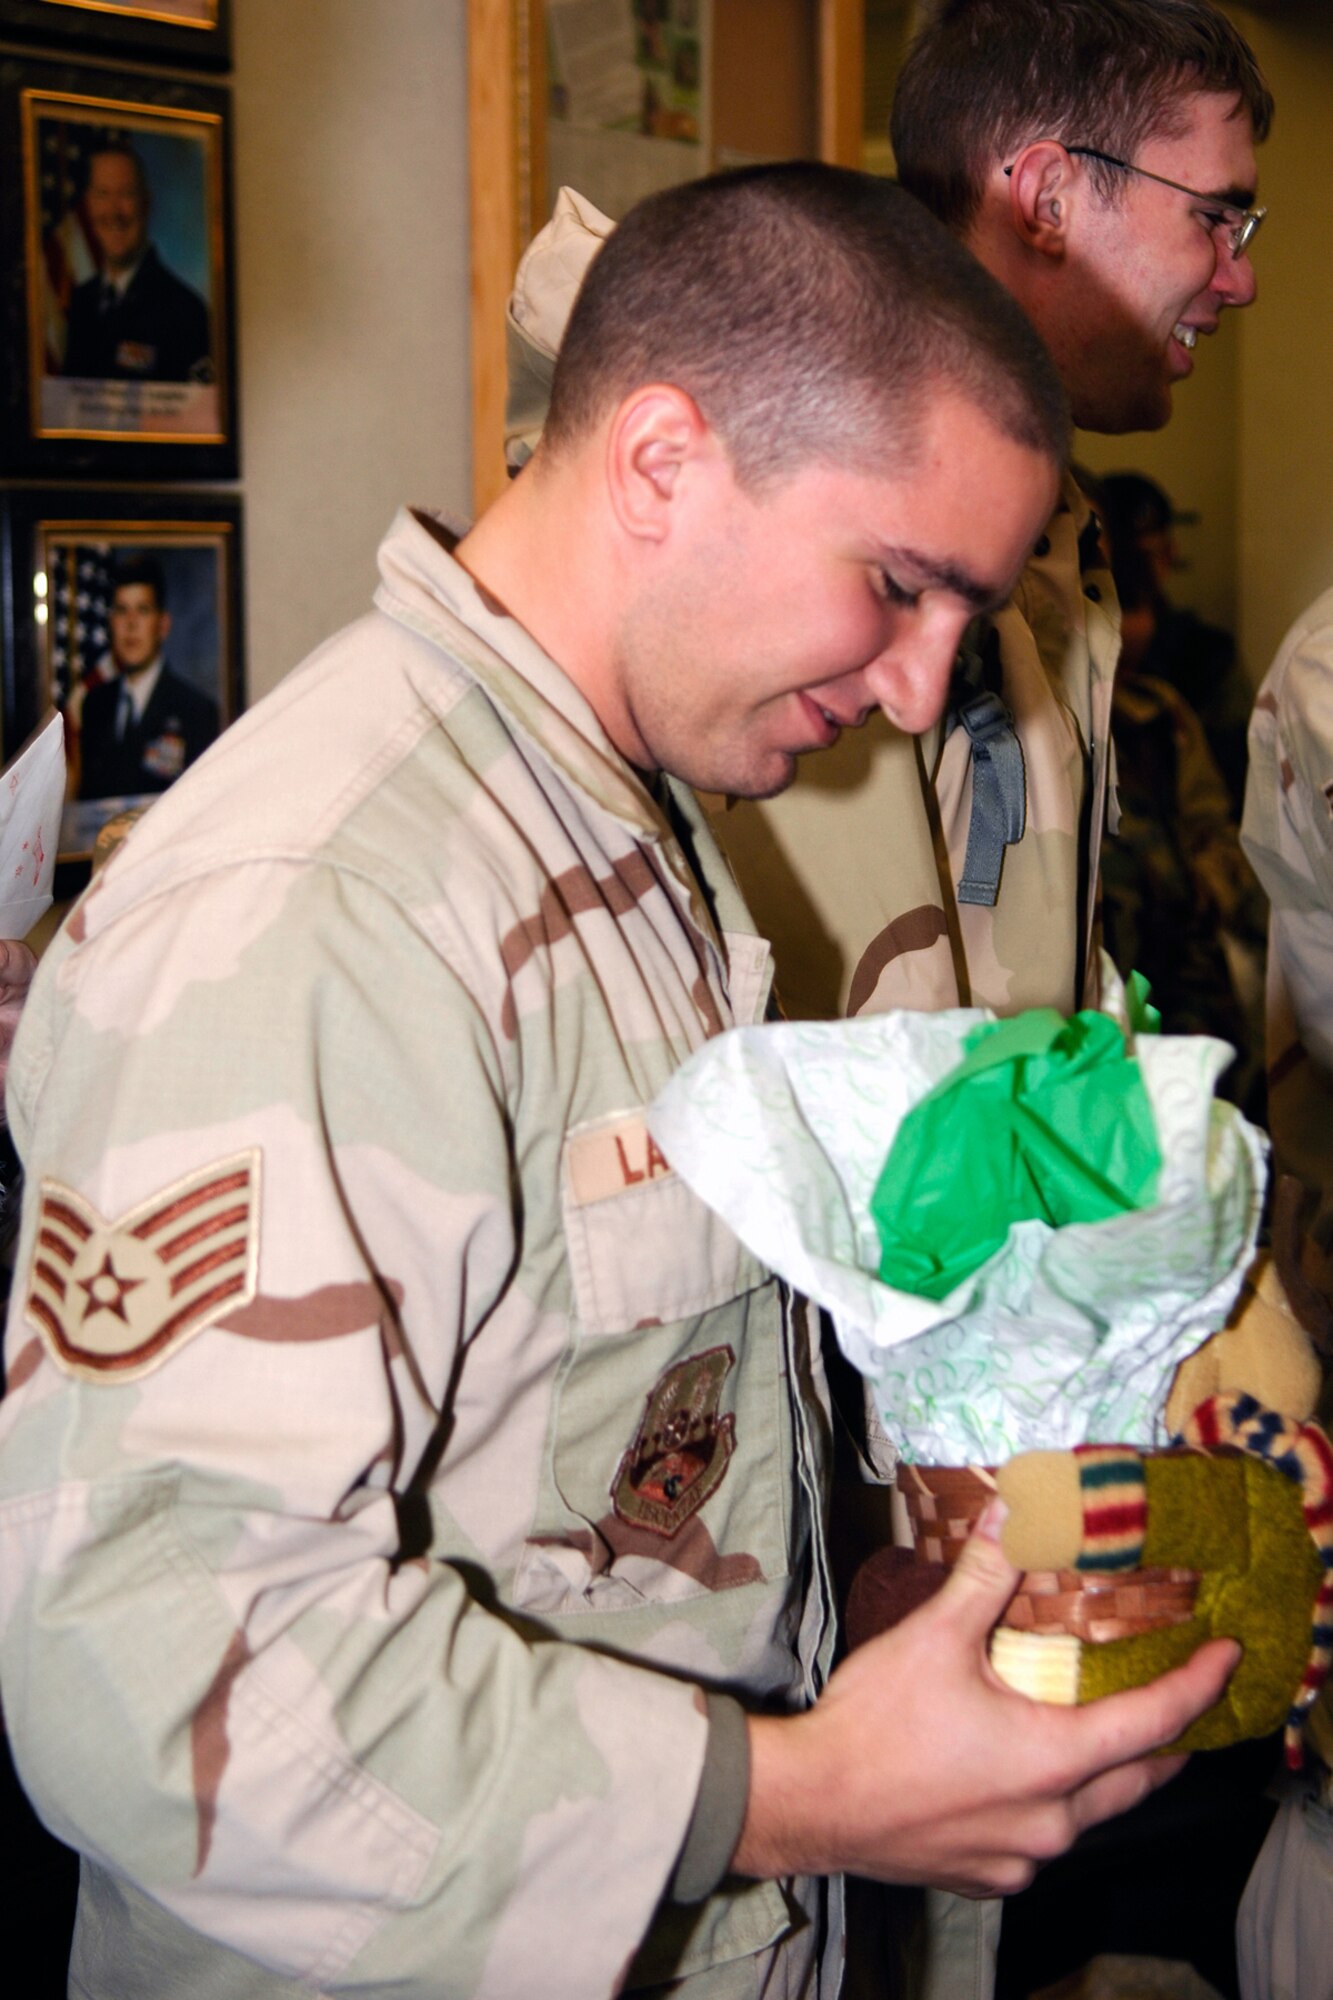 HANSCOM AIR FORCE BASE, MASS. -- Staff Sgt. Kyle LaTulippe, 66th Security Forces Squadron, examines the gift he was presented by 66 SFS Commander Maj. Tamara Mayer upon his return. All of the returning deployers received gifts. (U.S. Air Force Photo by Jan Abate)
